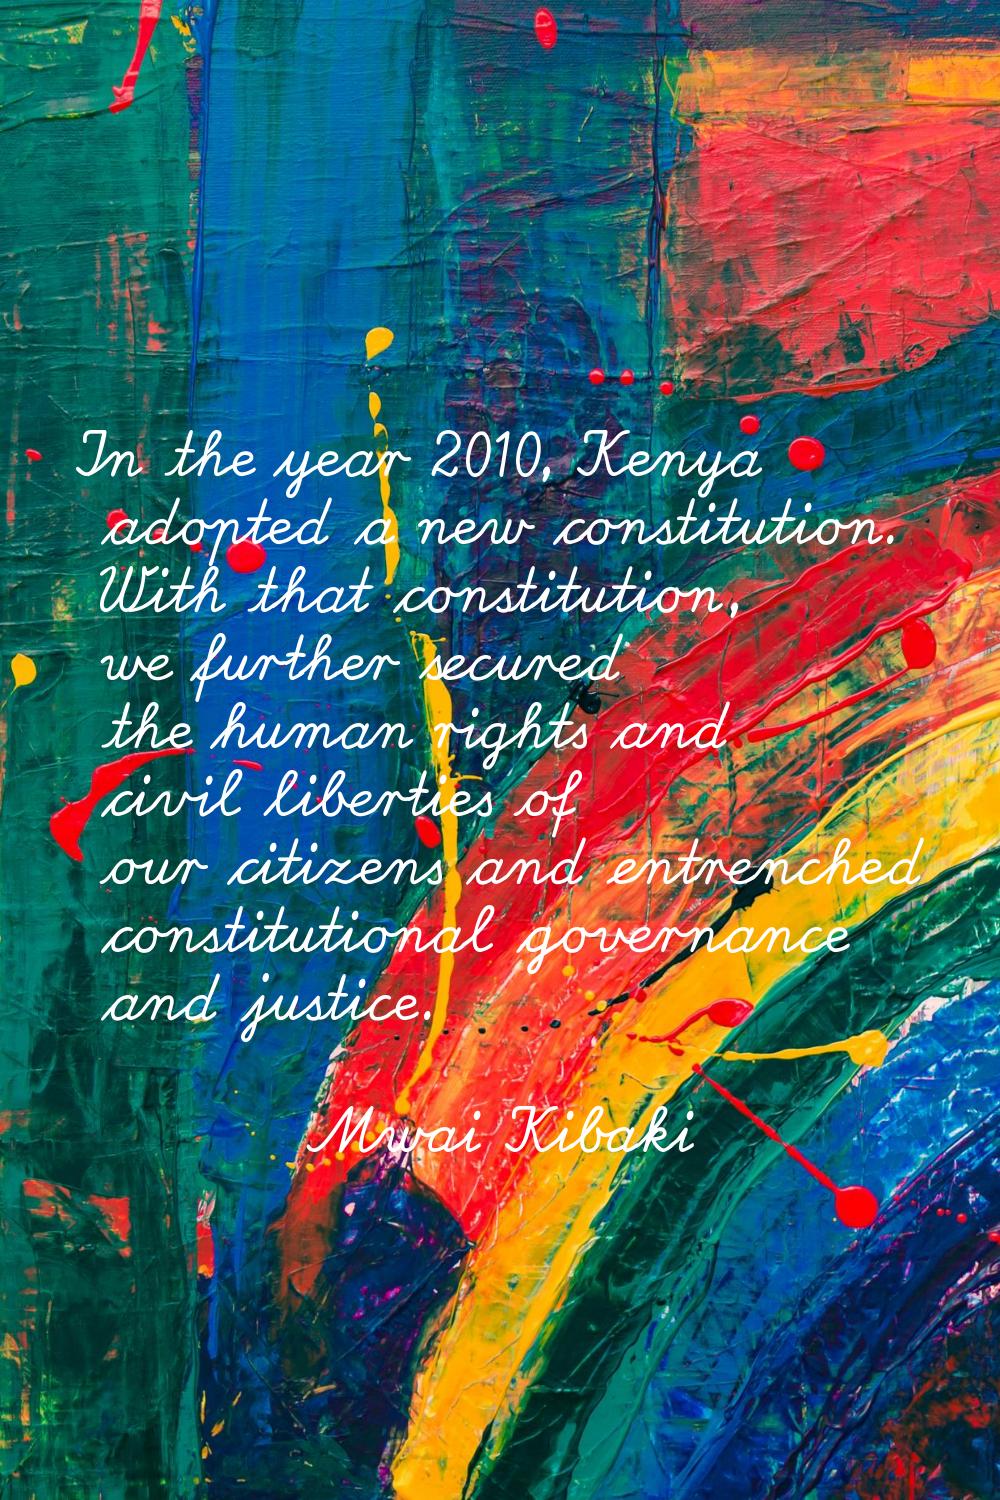 In the year 2010, Kenya adopted a new constitution. With that constitution, we further secured the 